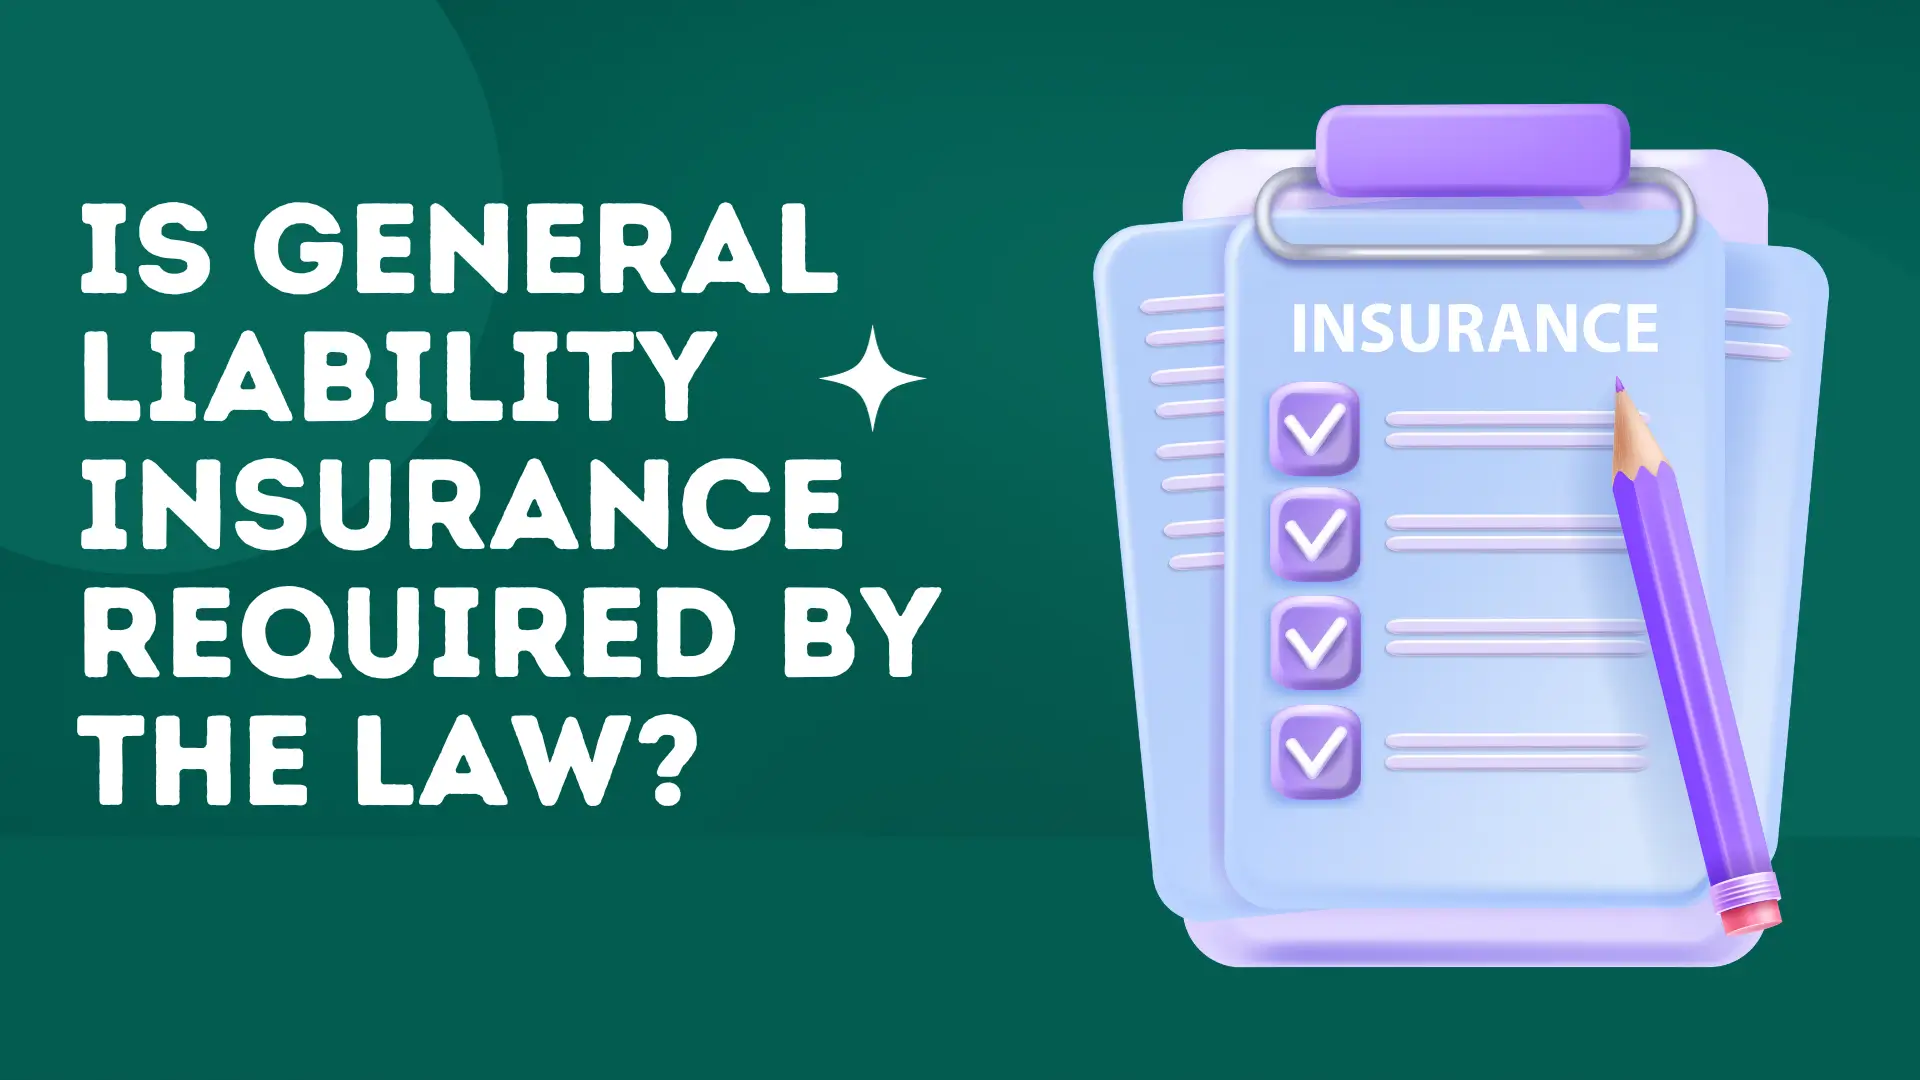 Is General Liability Insurance Required by the Law